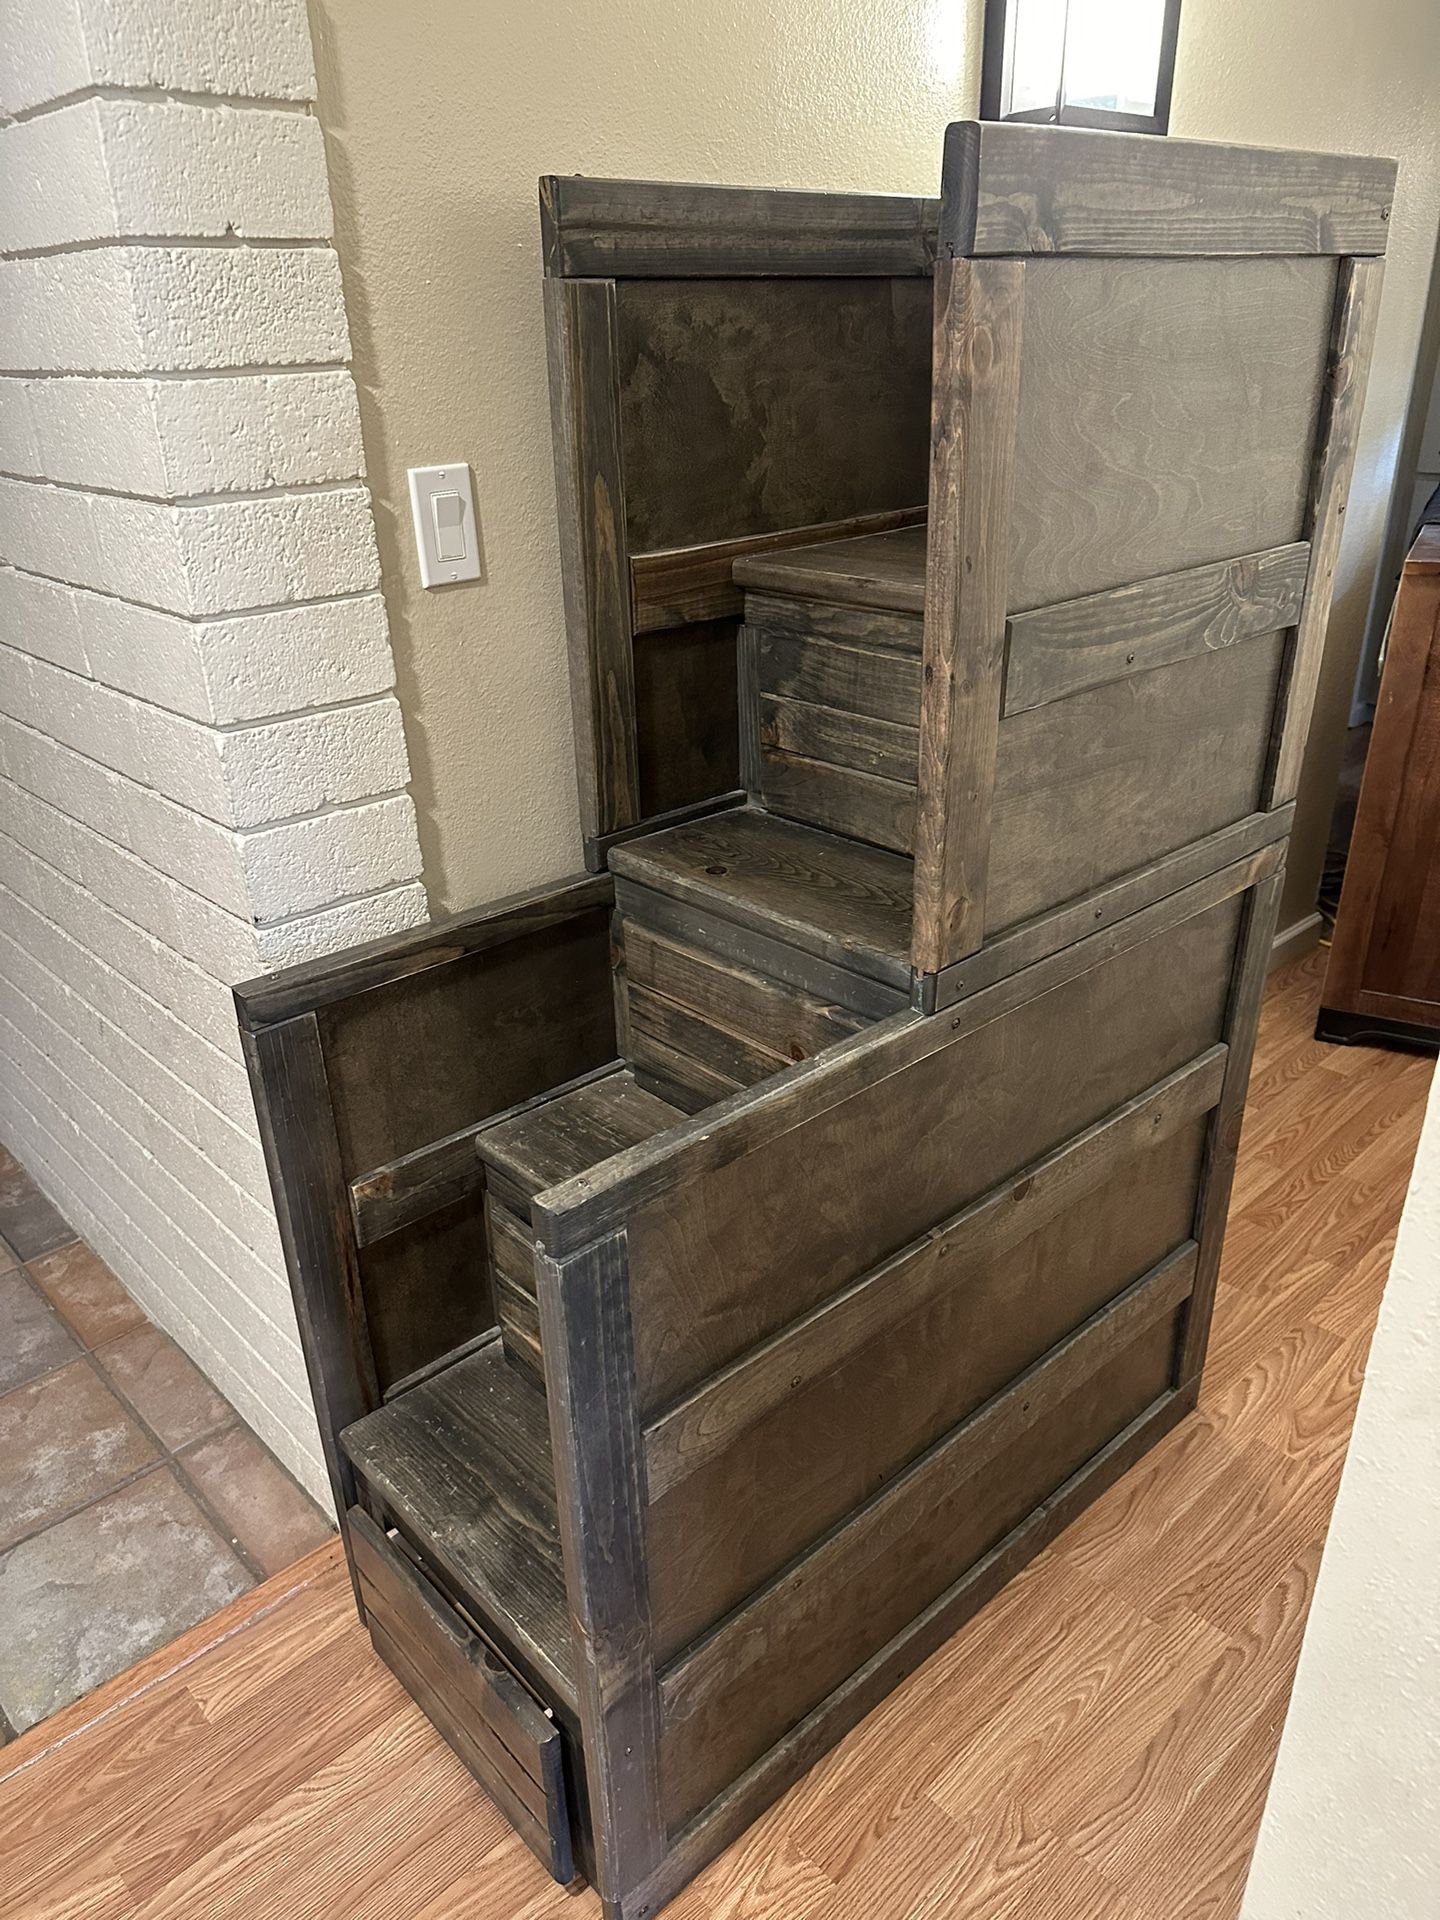 Bunk Bed Stairs With Drawers/storage